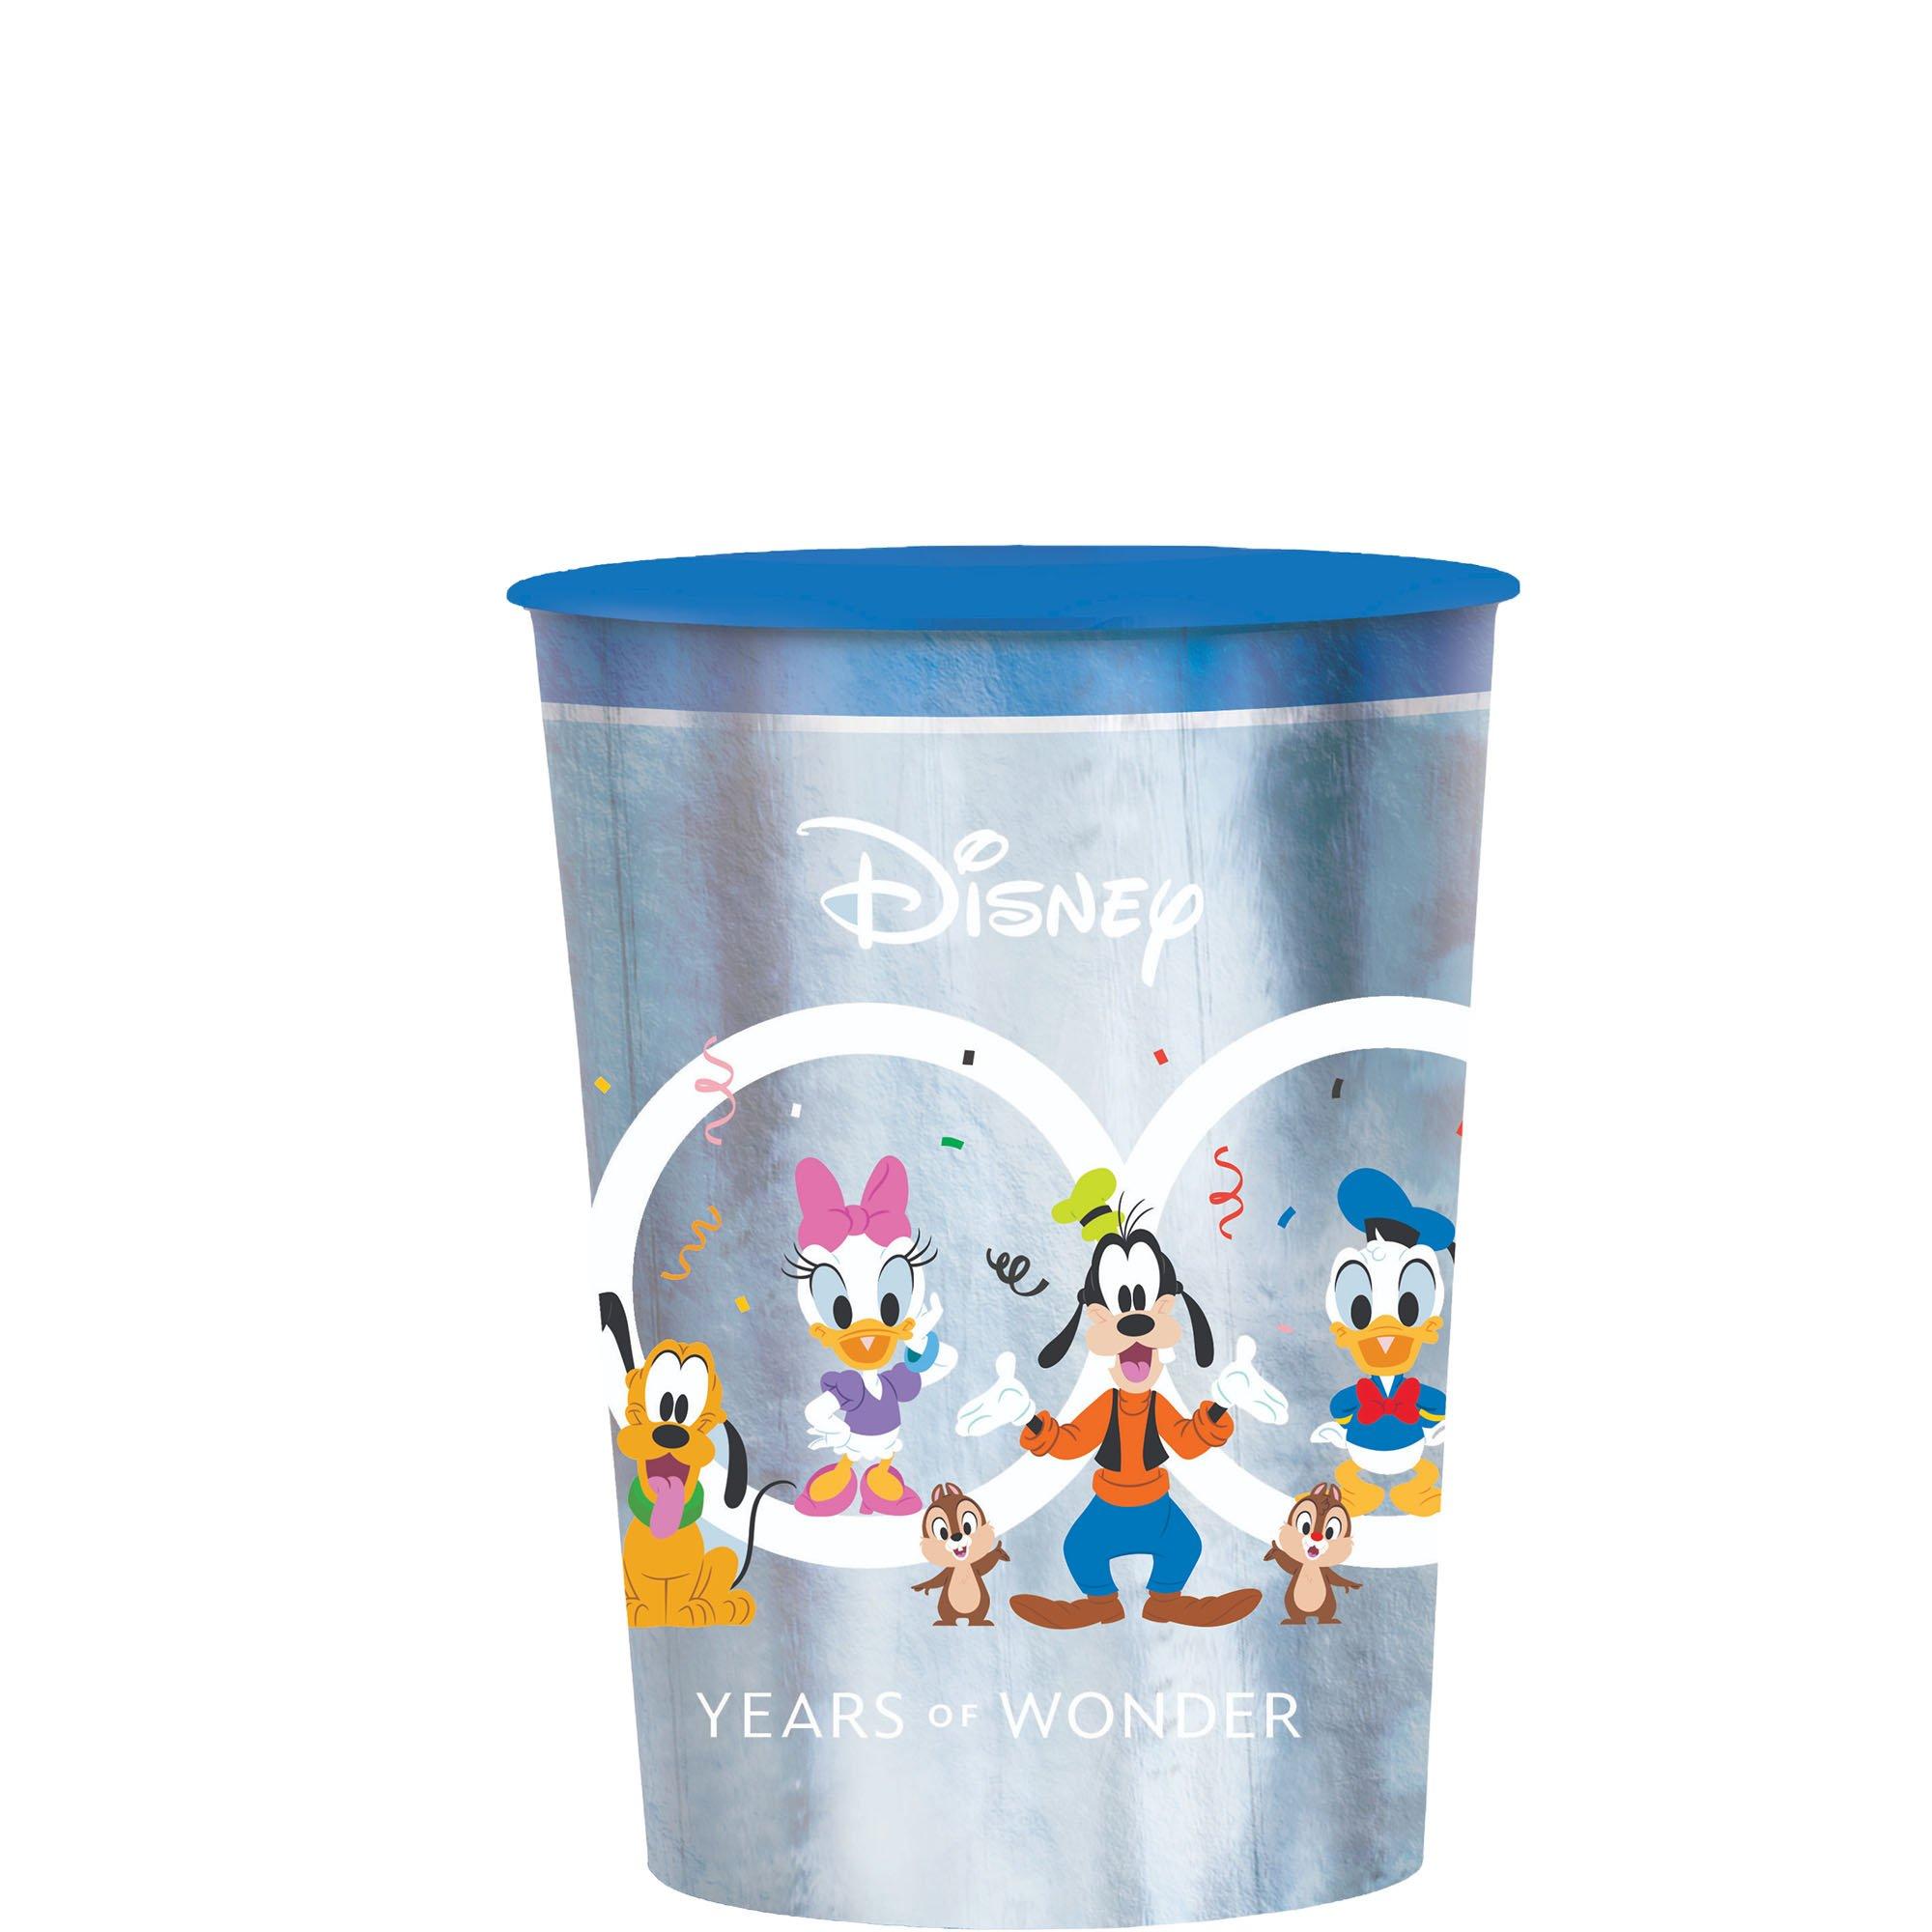 4-cup Round Glass Storage, Disney Commemorative Series - 100 Years